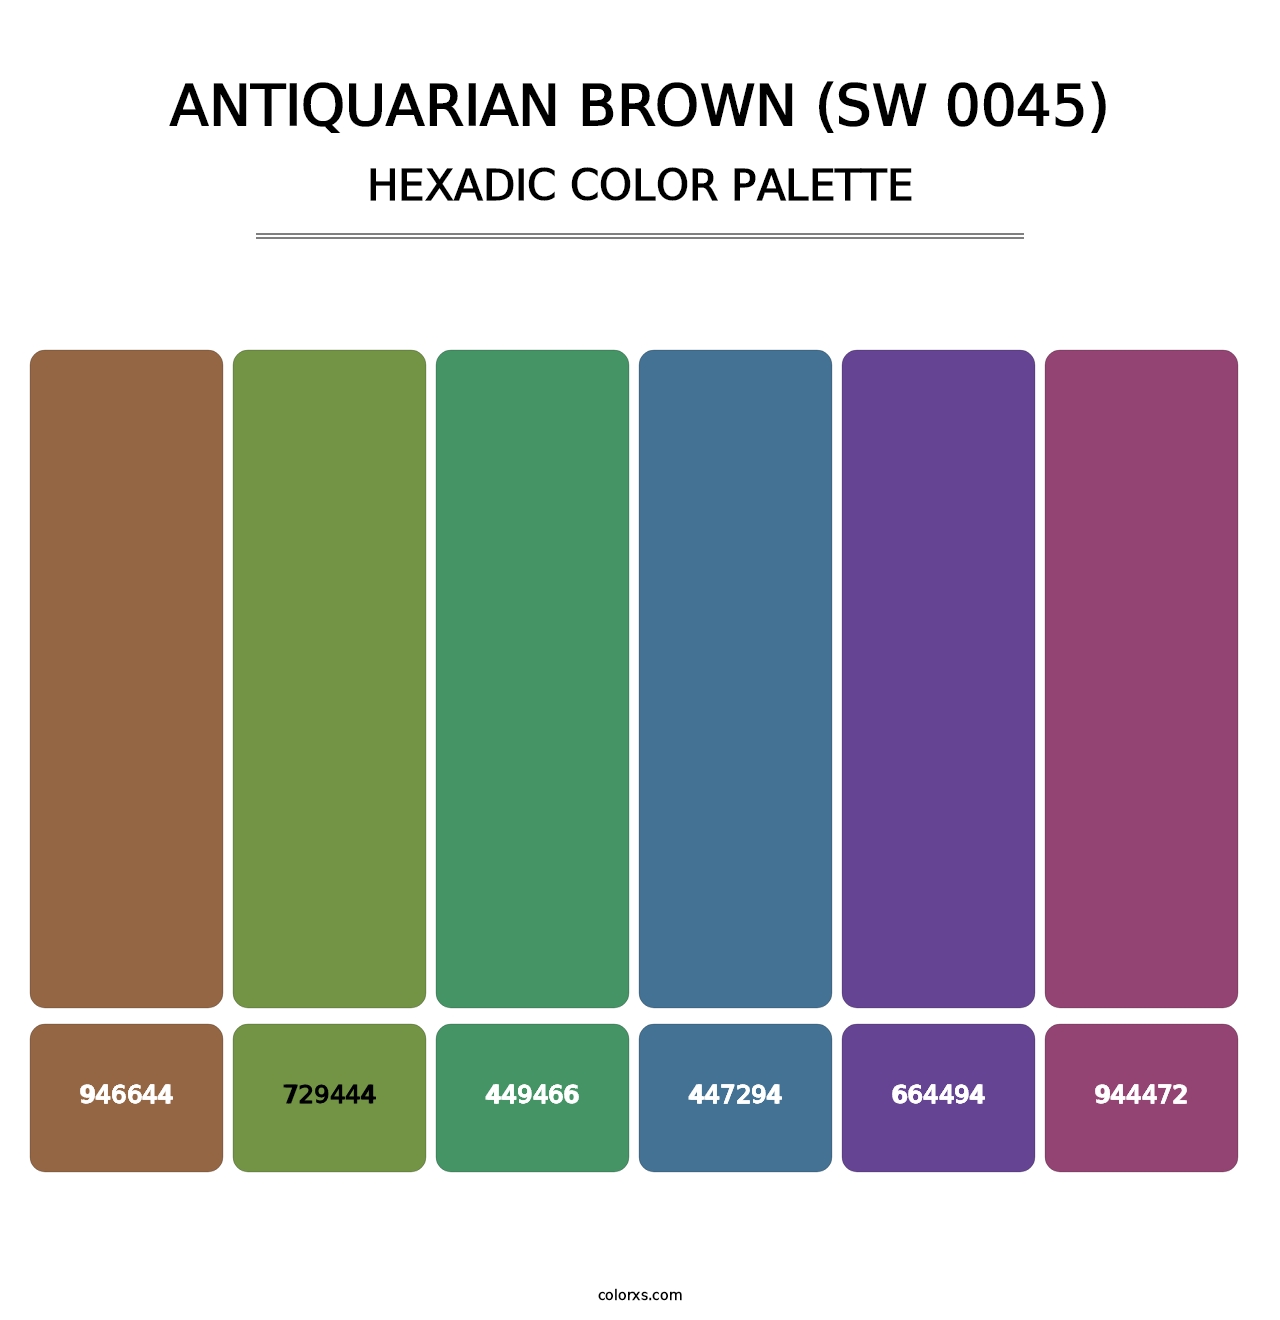 Antiquarian Brown (SW 0045) - Hexadic Color Palette